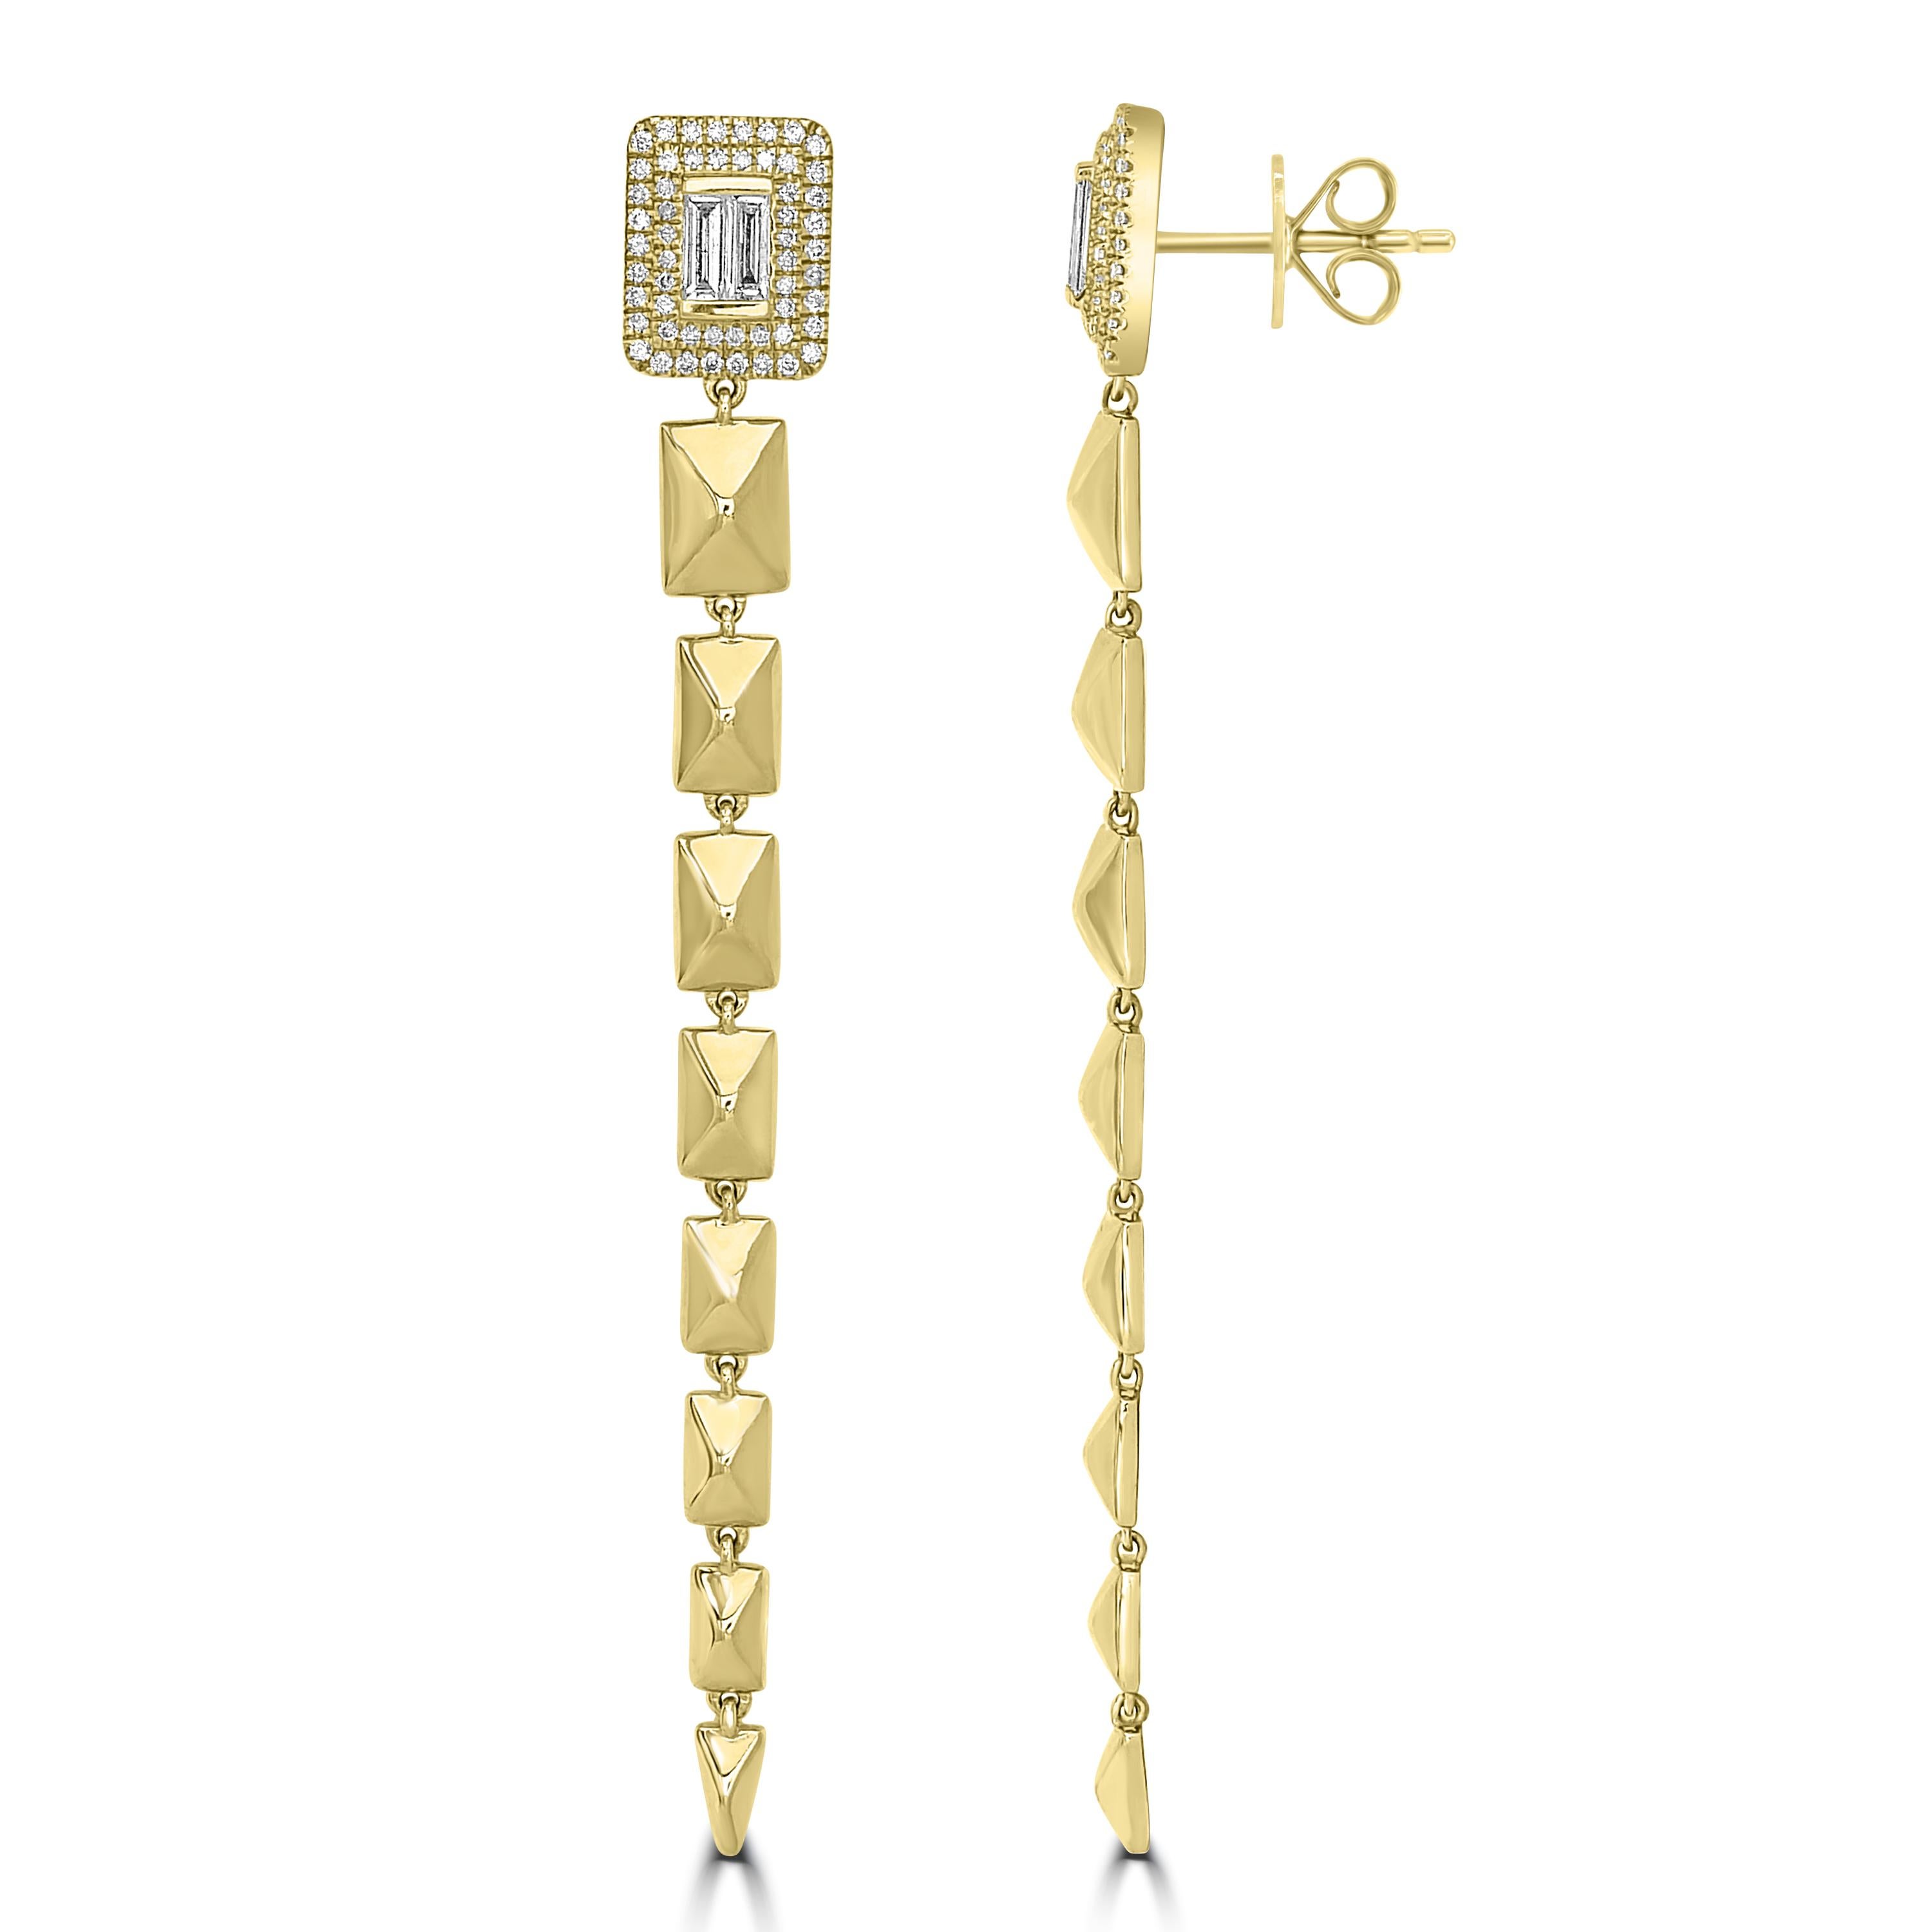 Luxle 0.6Cts. Baguette and Round Diamond Graduated Drop Earrings in 18k Yellow Gold. The surmount of the Luxle drop earrings glitters with baguette and round diamonds as rectangular gold sections graduate from bigger to smaller motifs in polished